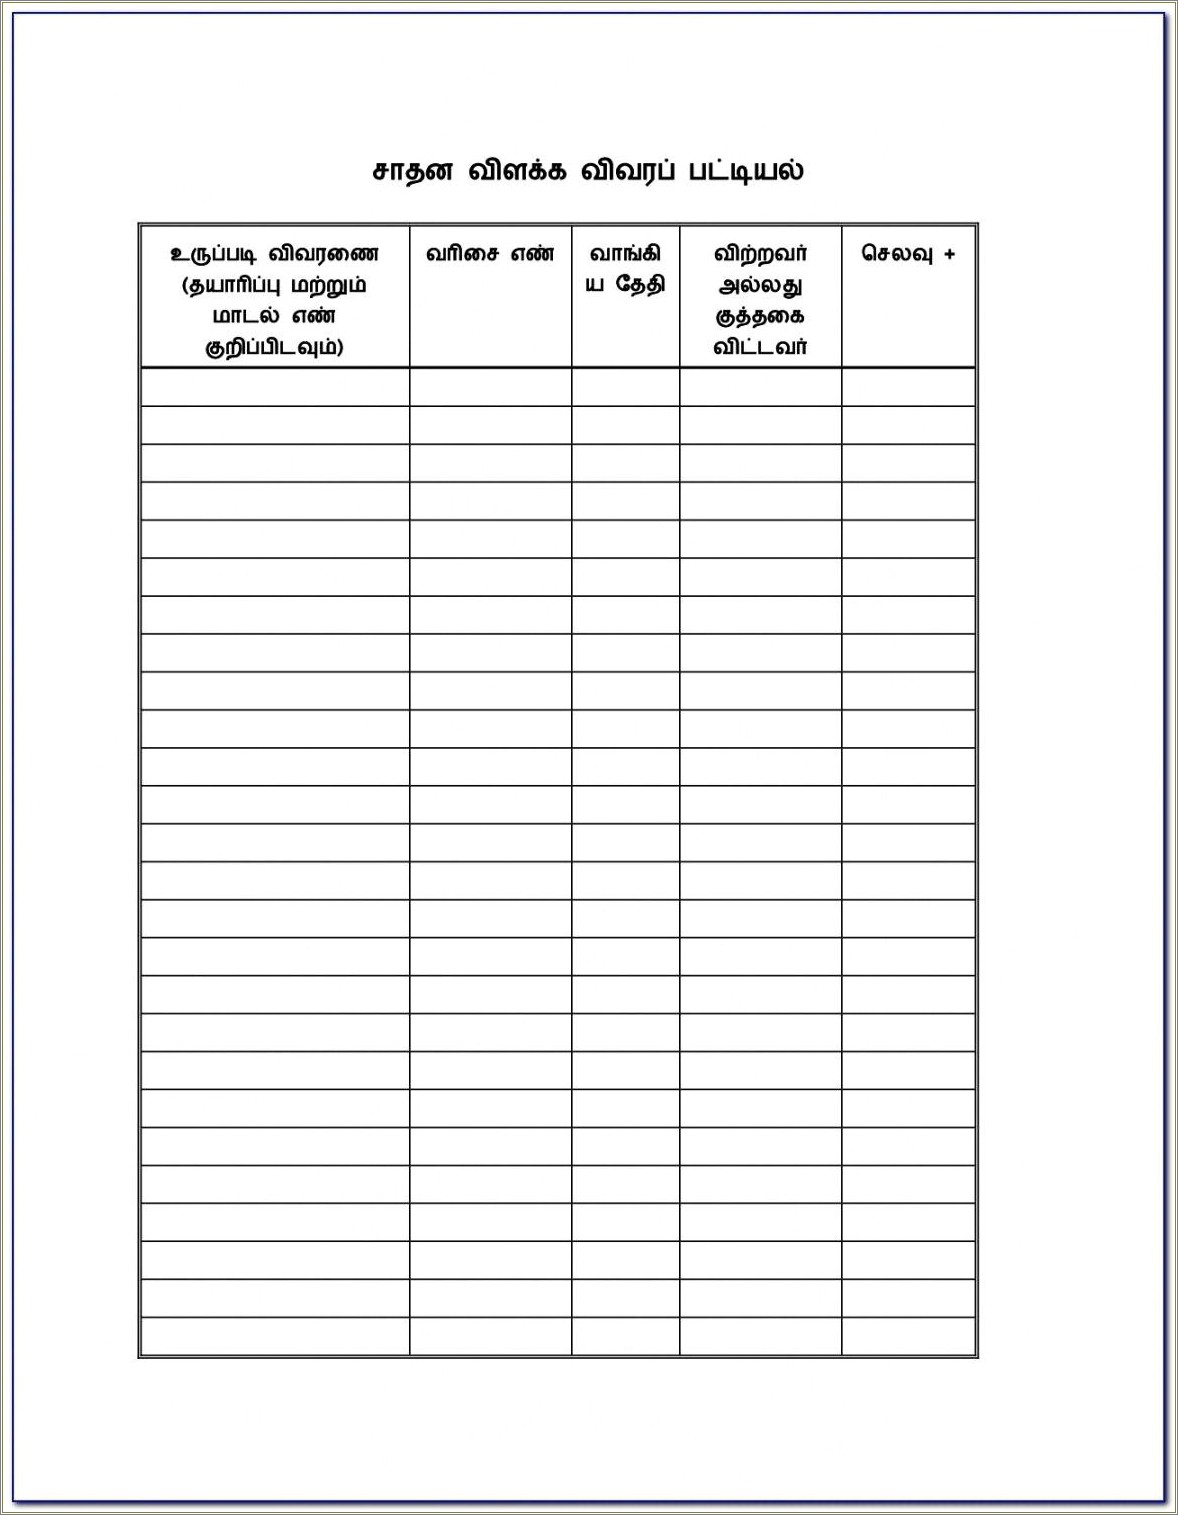 Free Printable Chemical Inventory List Template